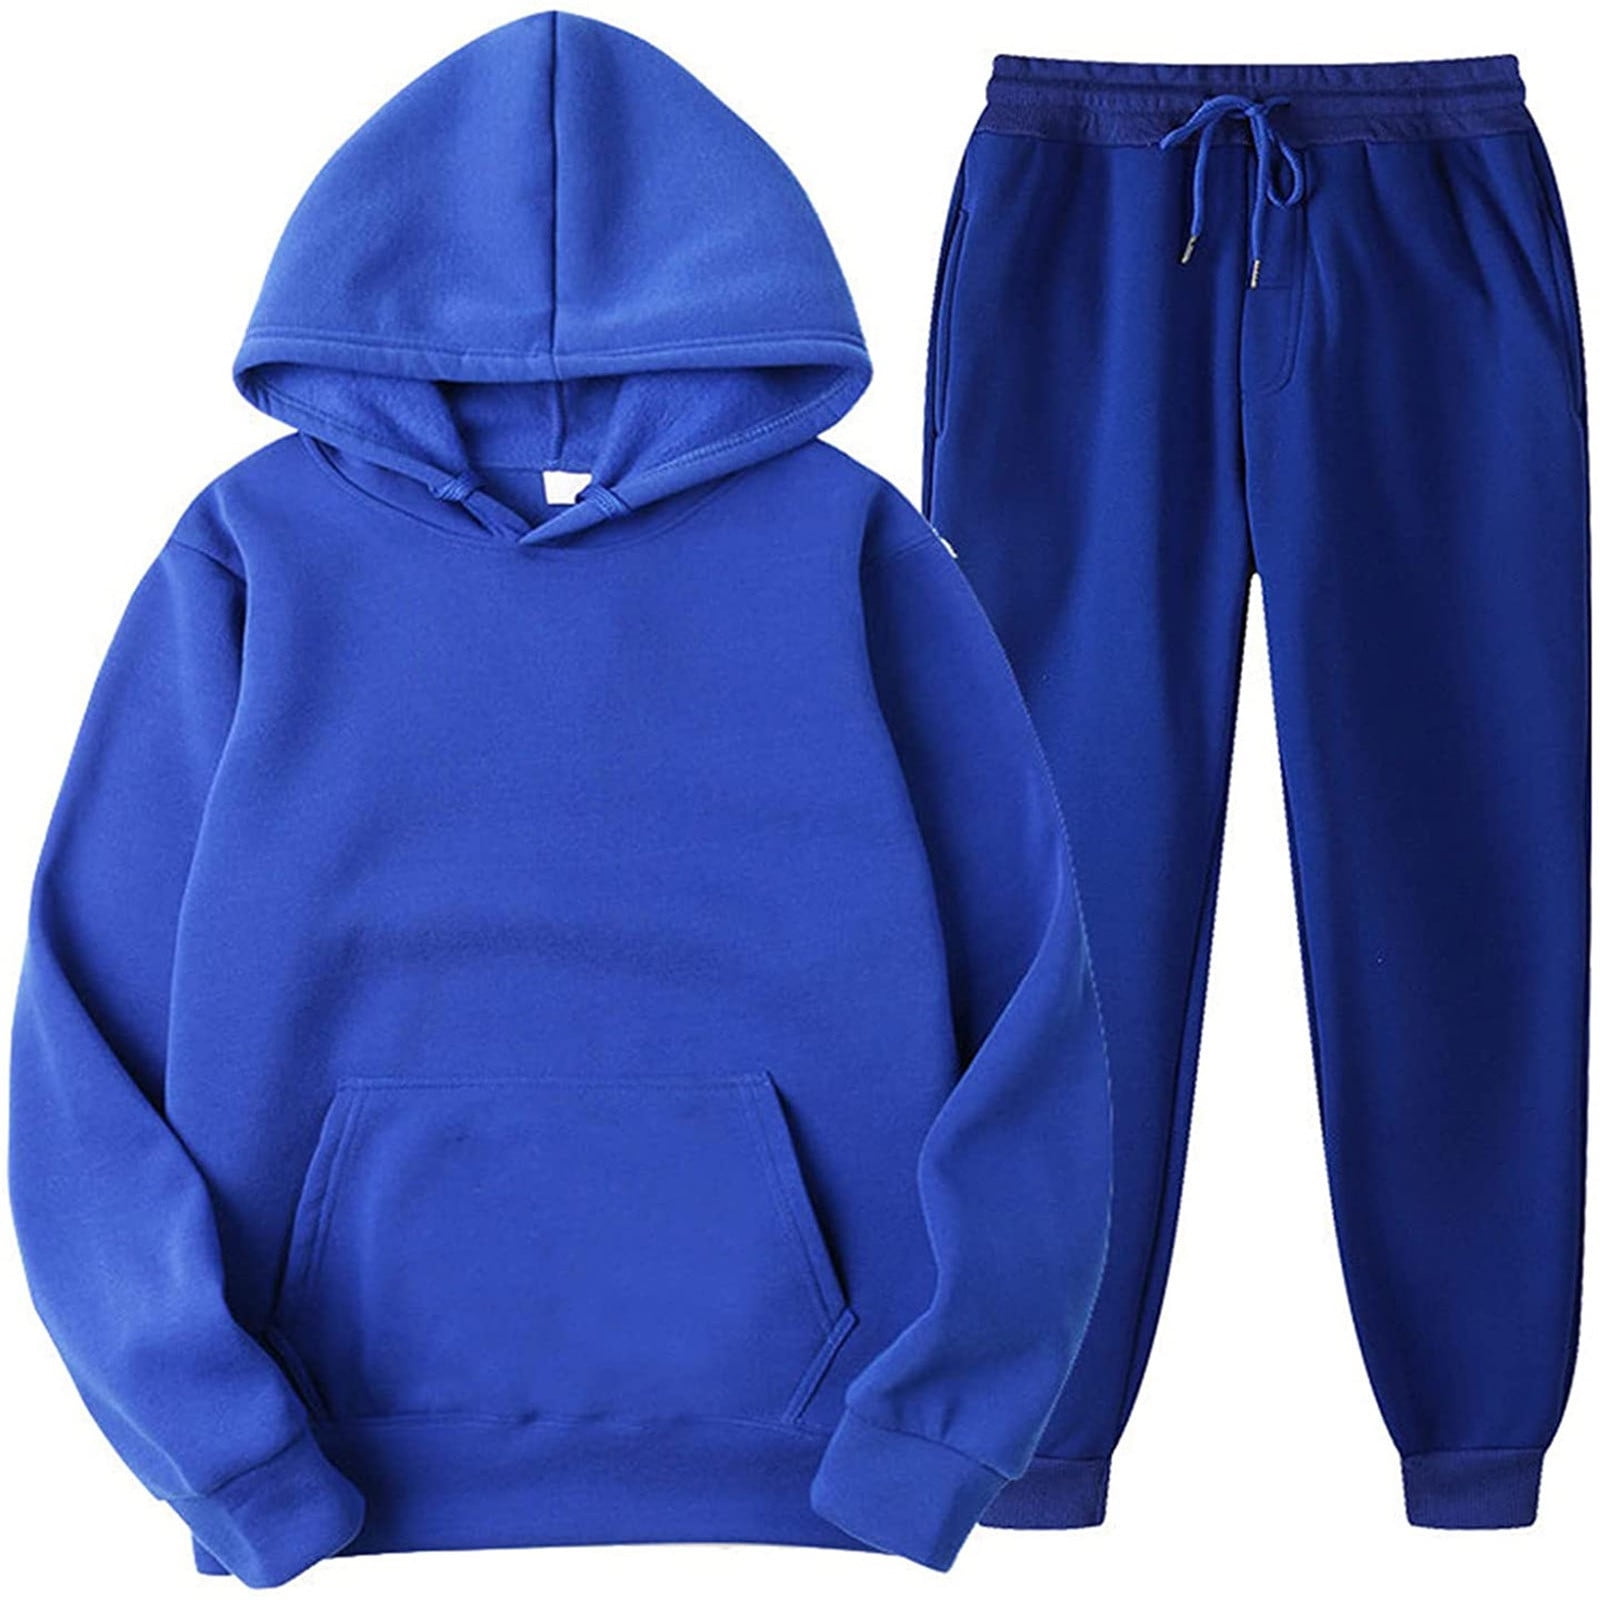 Posijego Women Men 2 Piece Outfit Tracksuit Oversized Lounge Hoodie ...